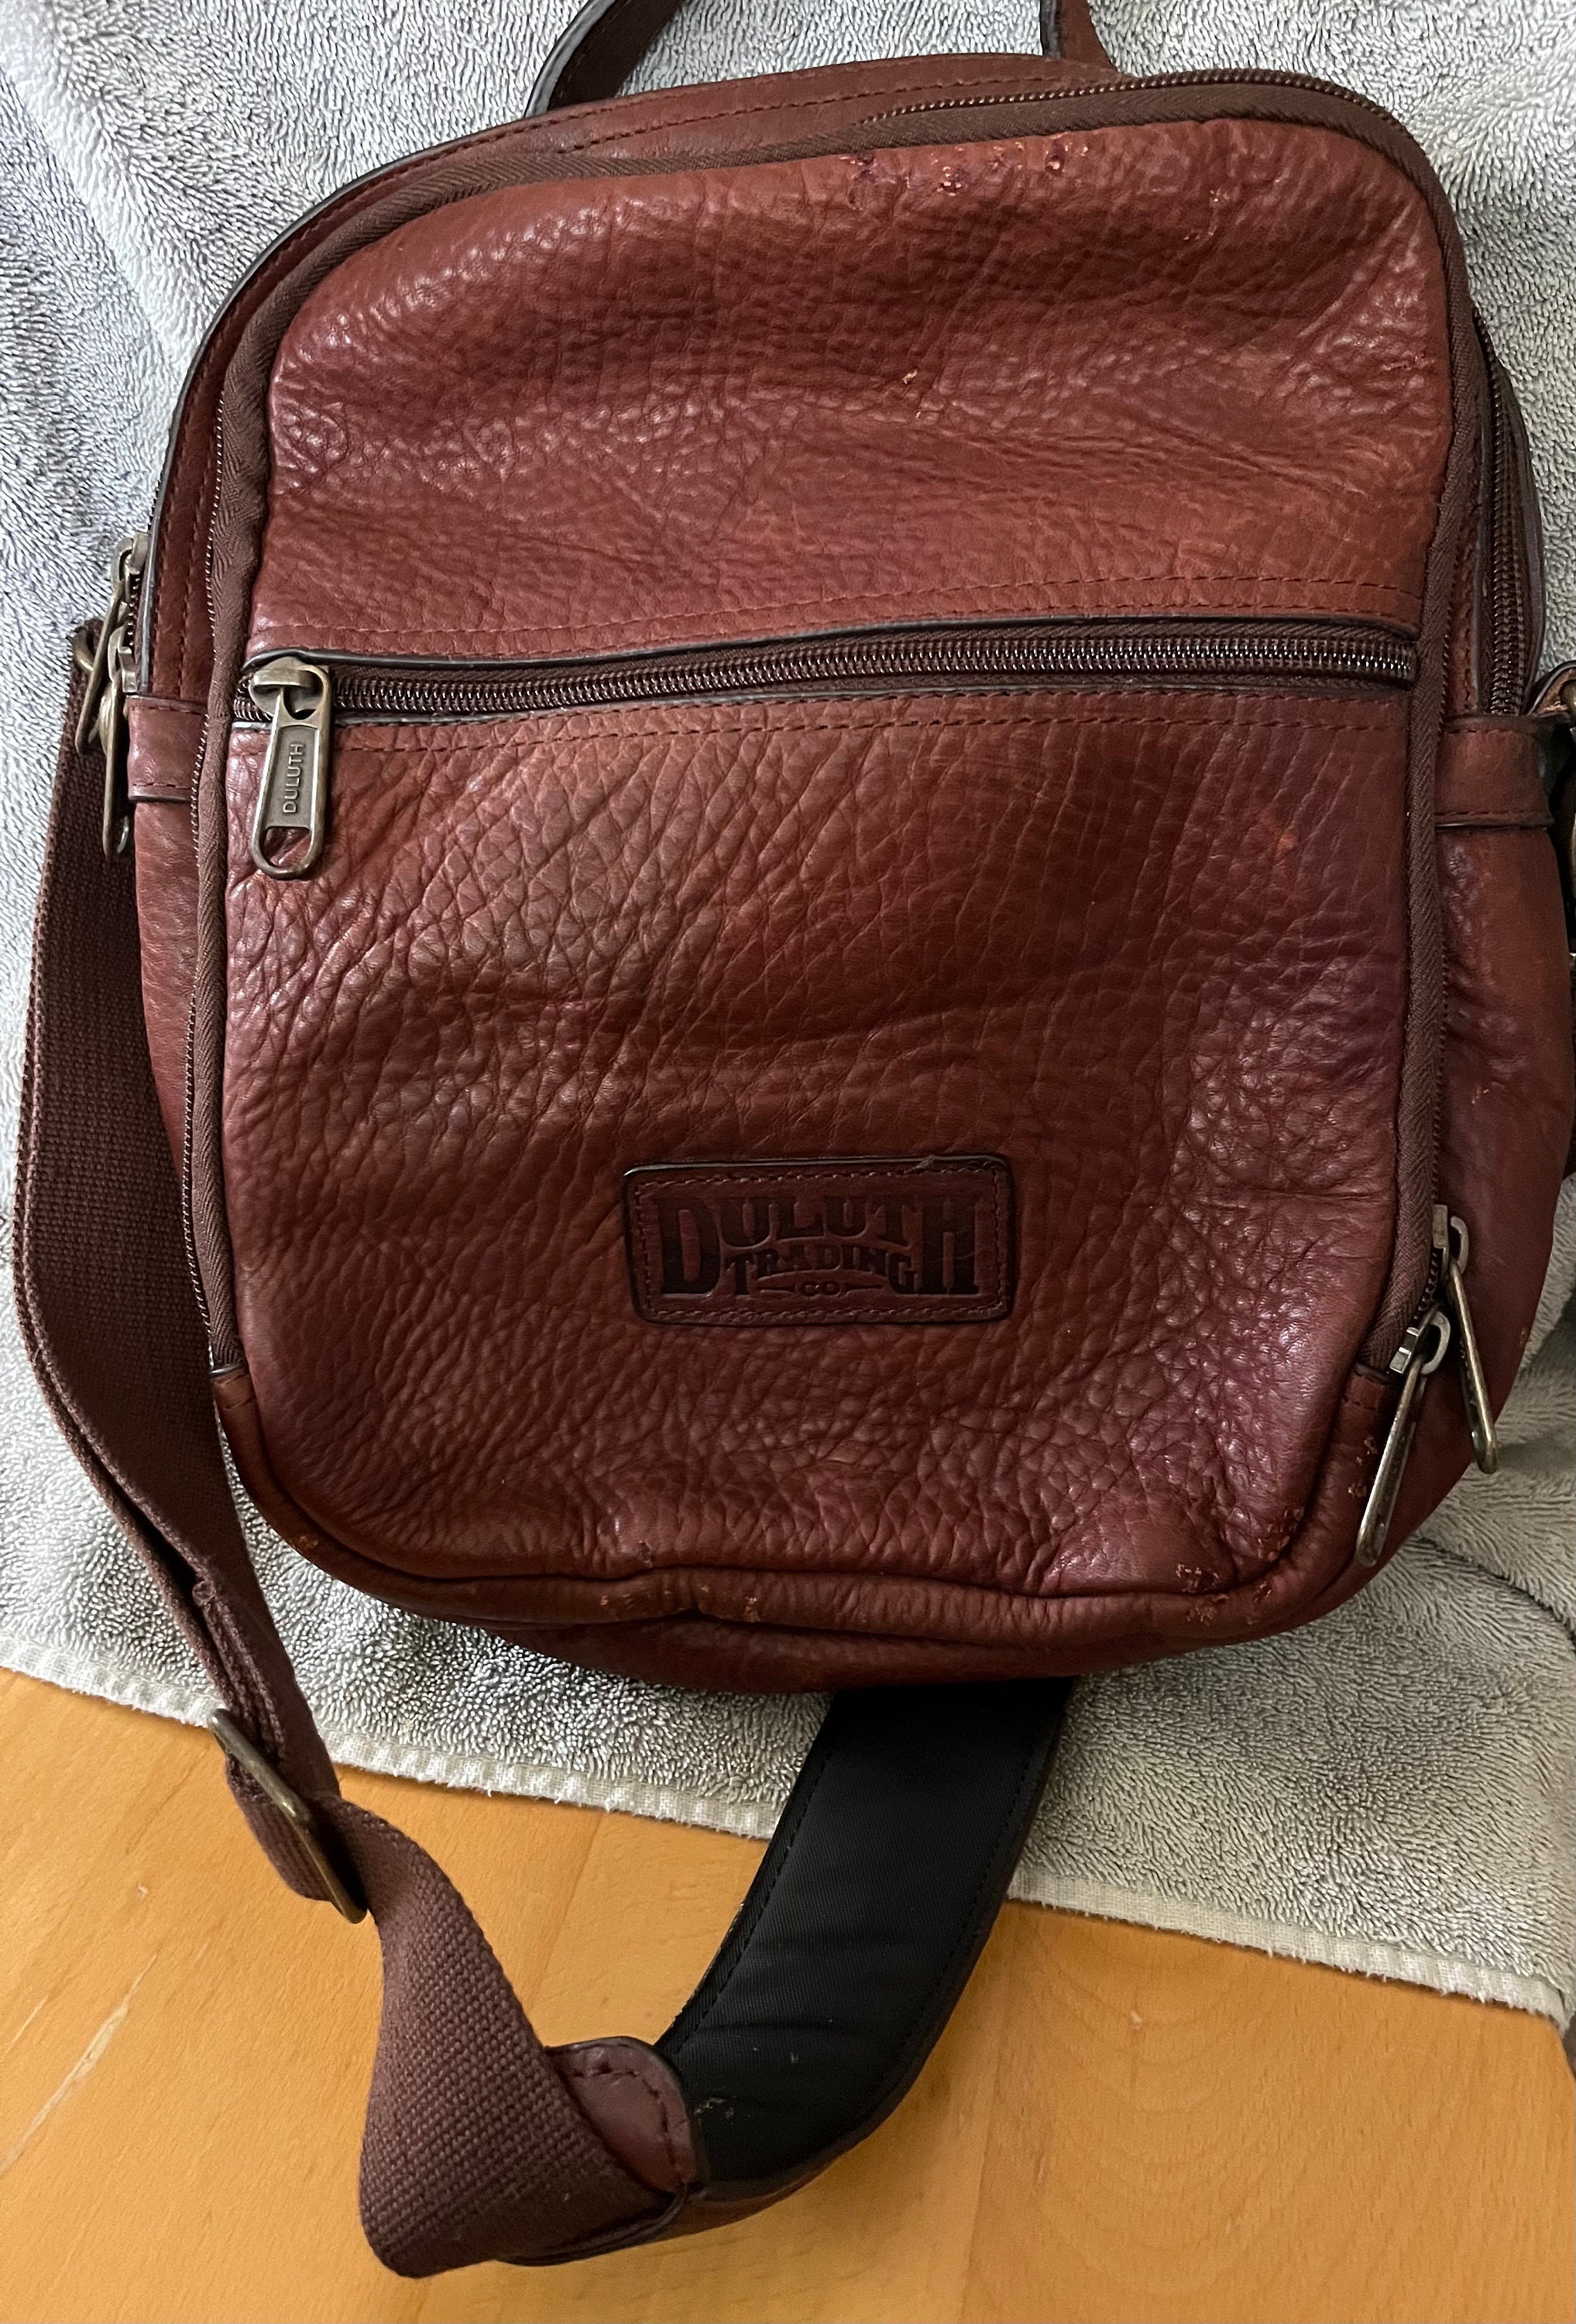 Leather Duffle Bag  Duluth Trading Company